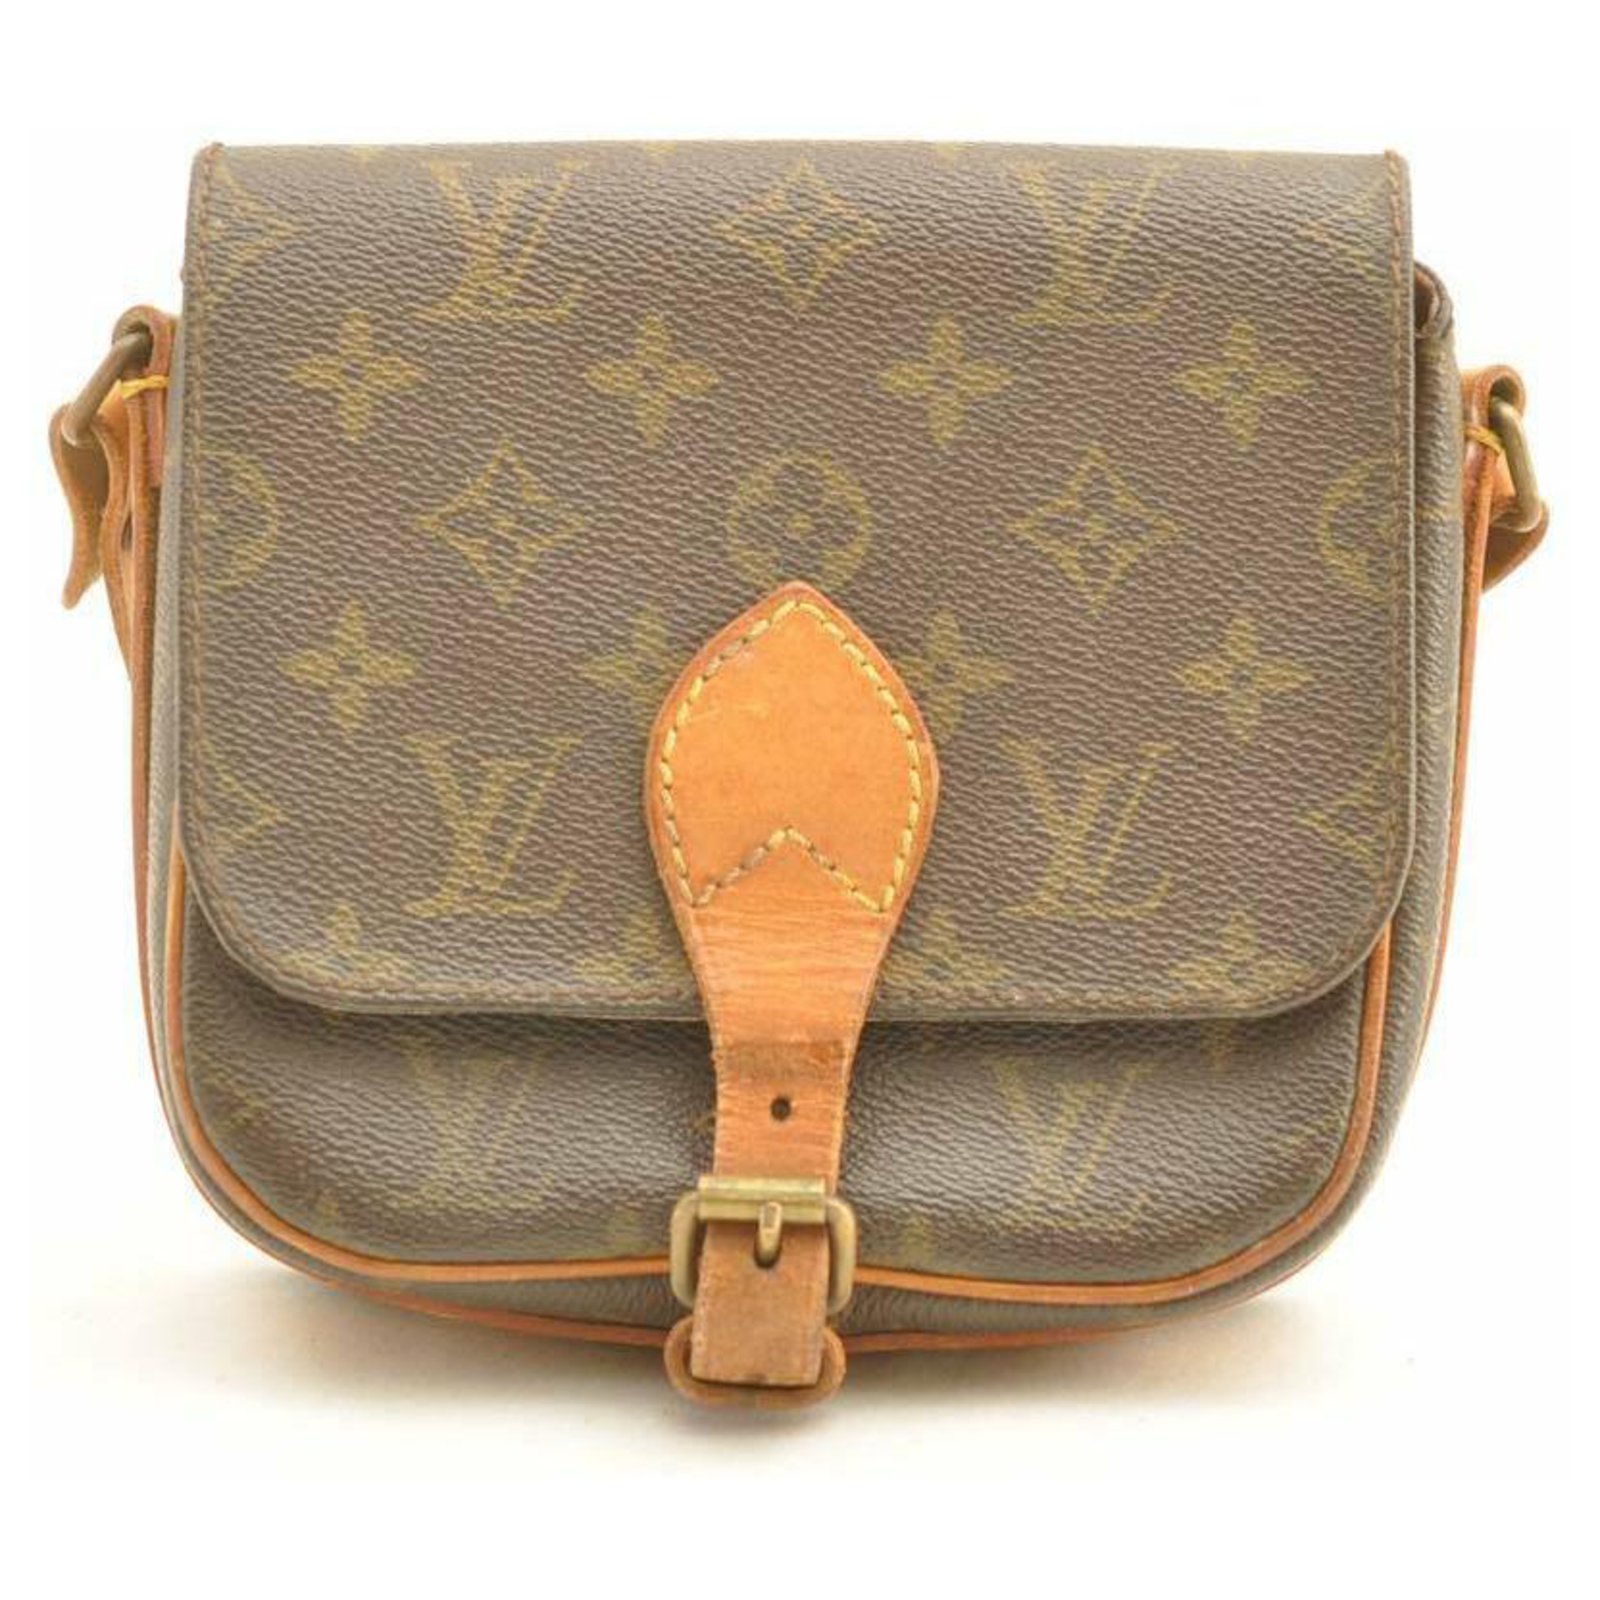 Louis Vuitton Cartouchiere Pm in Brown